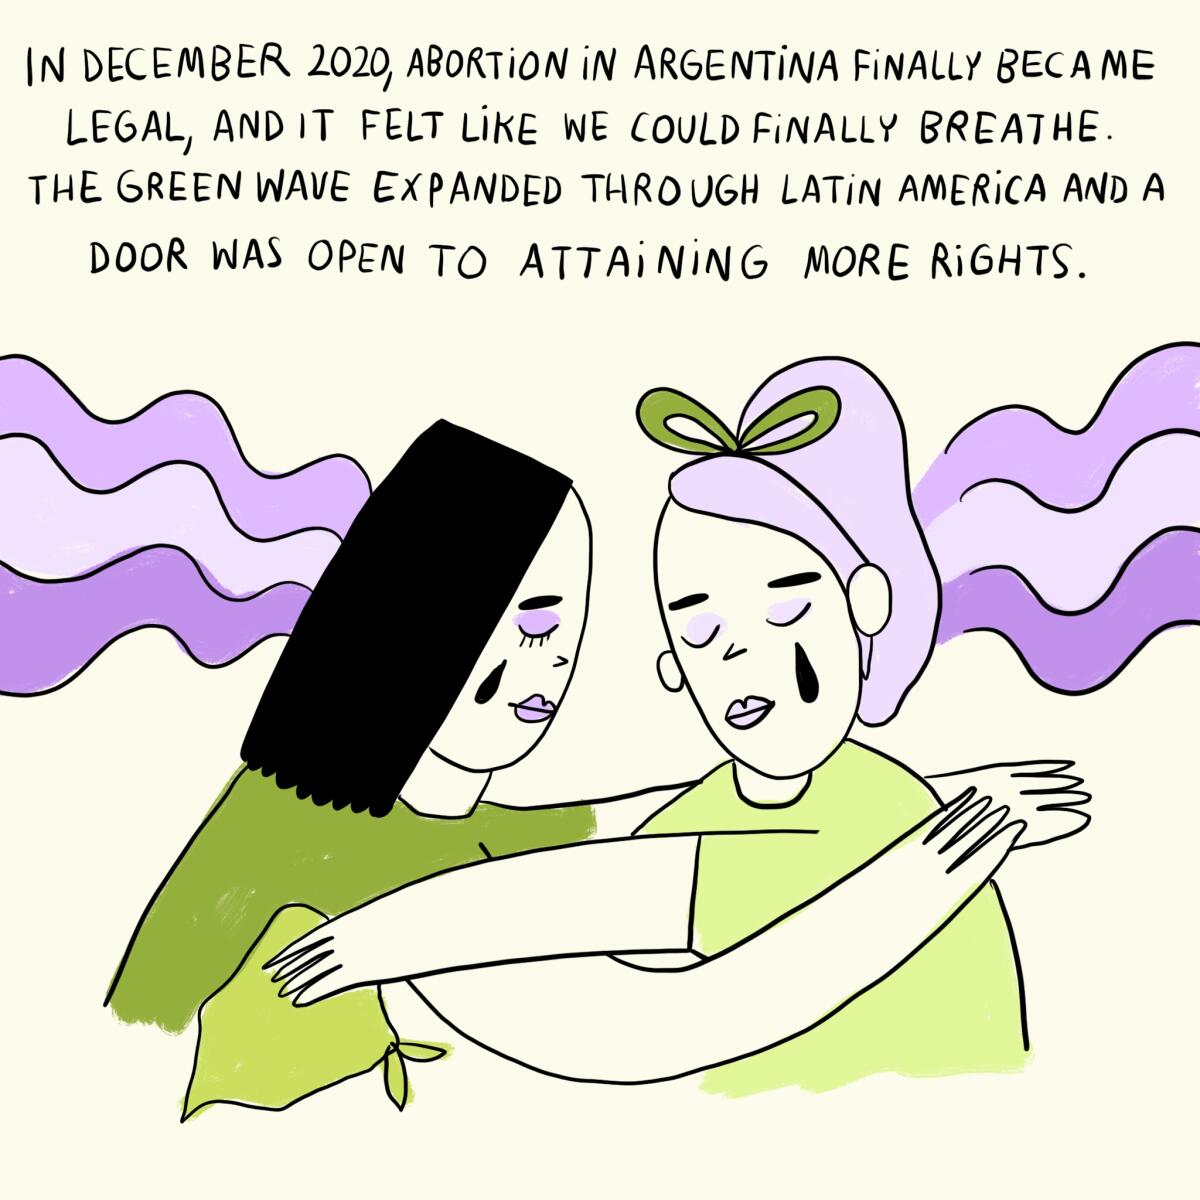 In December 2020, abortion in Argentina finally became legal, and it felt like we could finally breathe. 